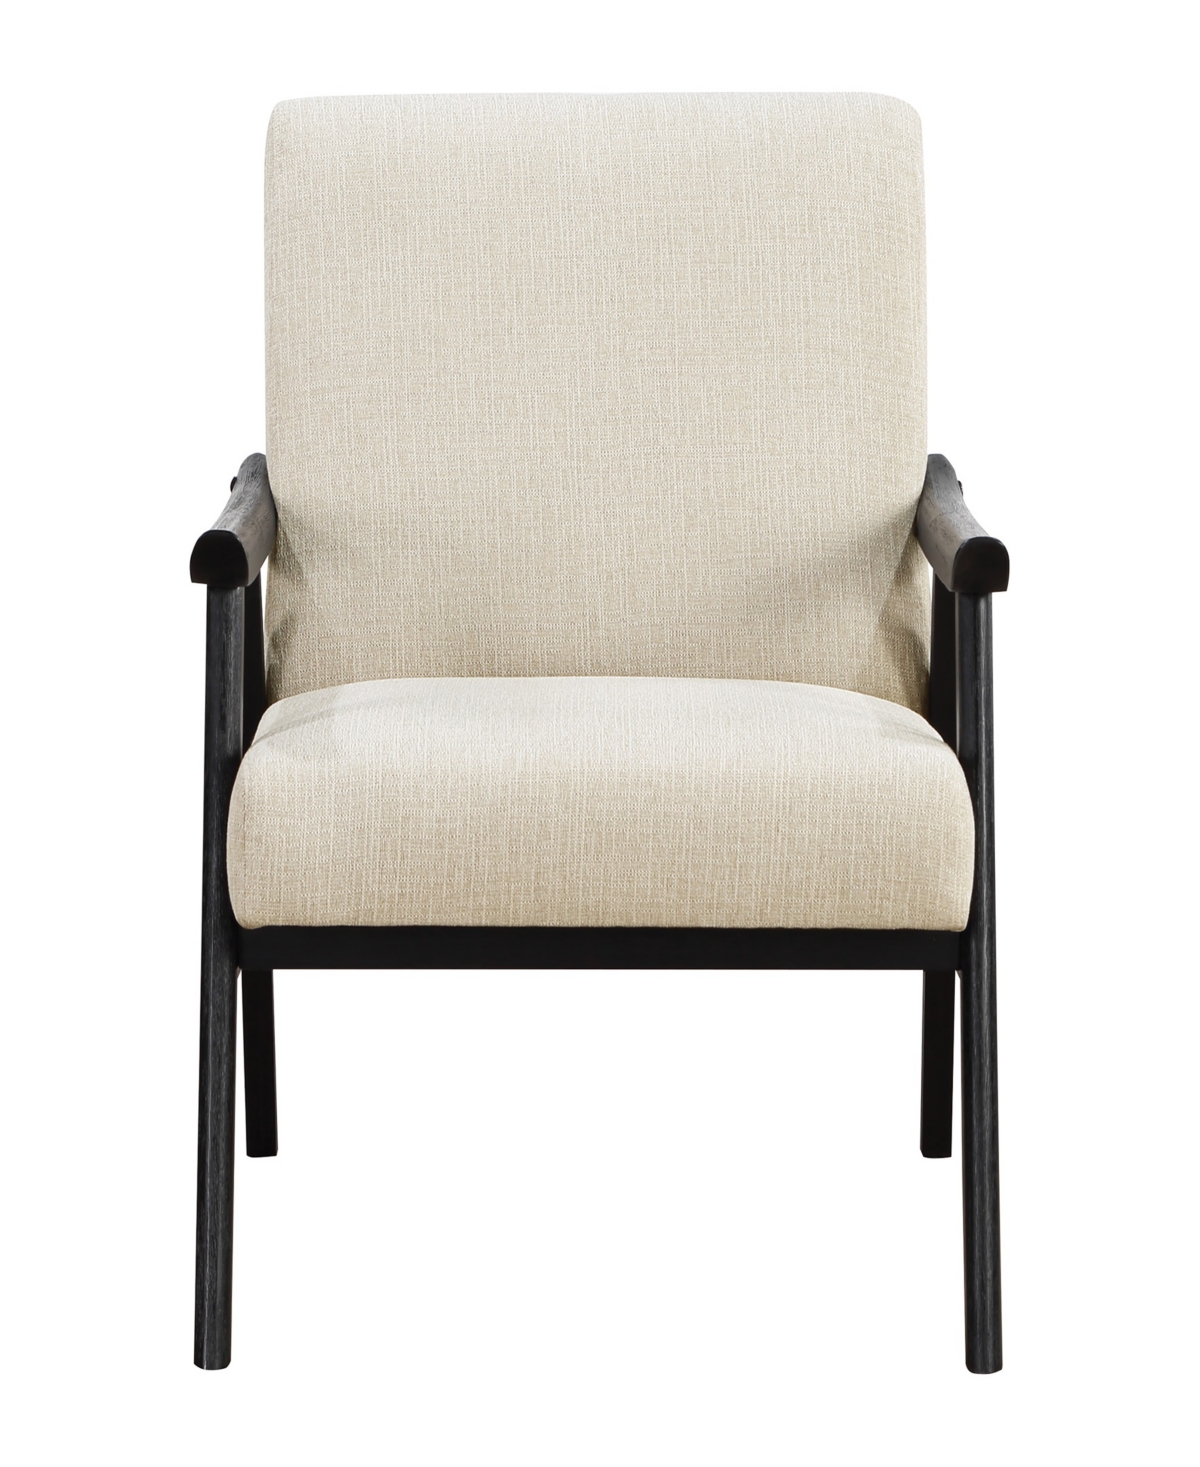 Shop Osp Home Furnishings Office Star Weldon Armchair In Linen Fabric With Black Finished Frame